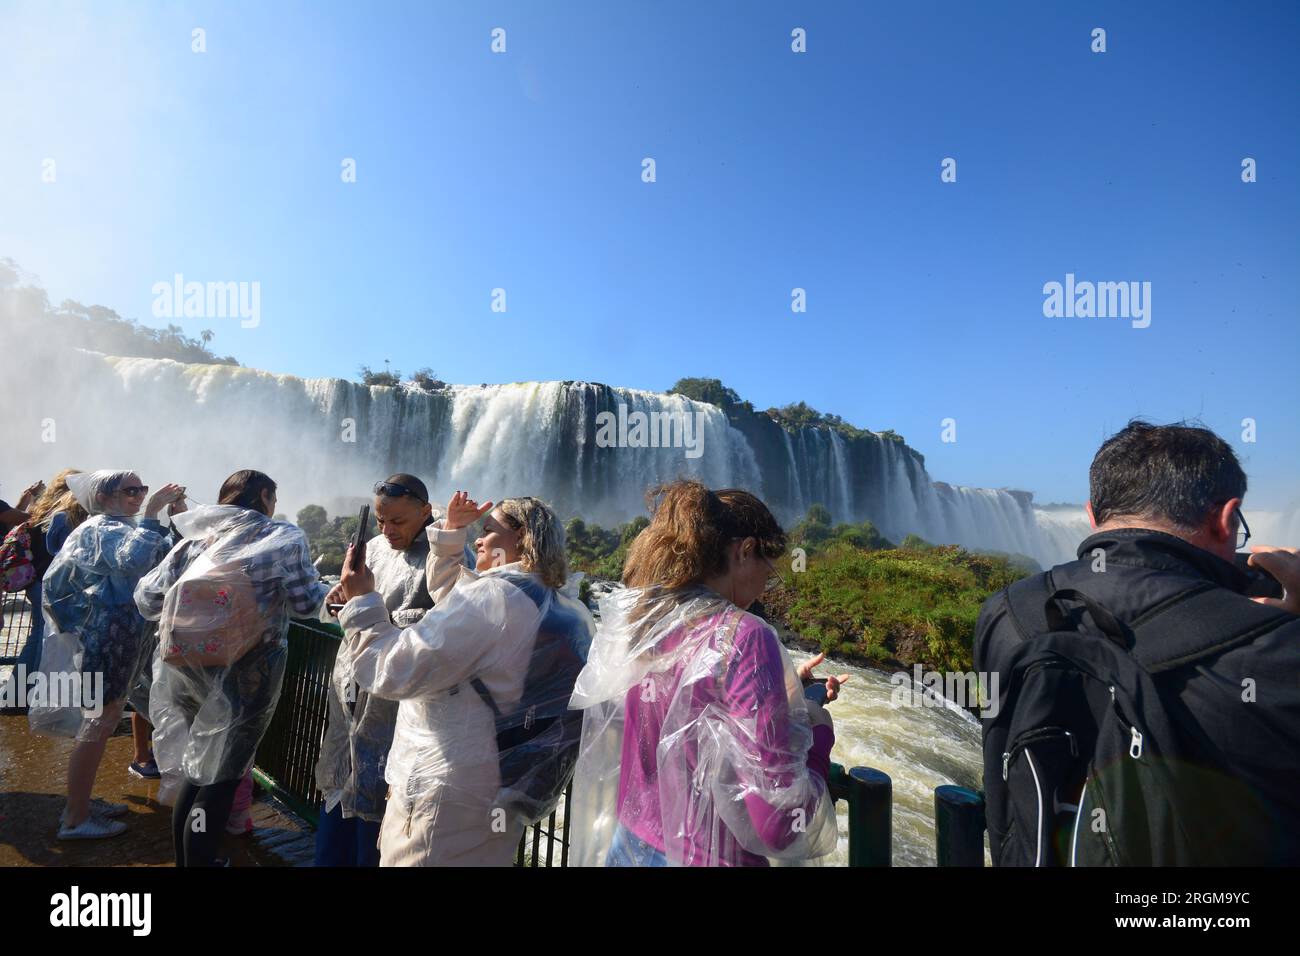 Tourists at Iguazu Falls, one of the great natural wonders of the world, on the border of Brazil and Argentina Stock Photo